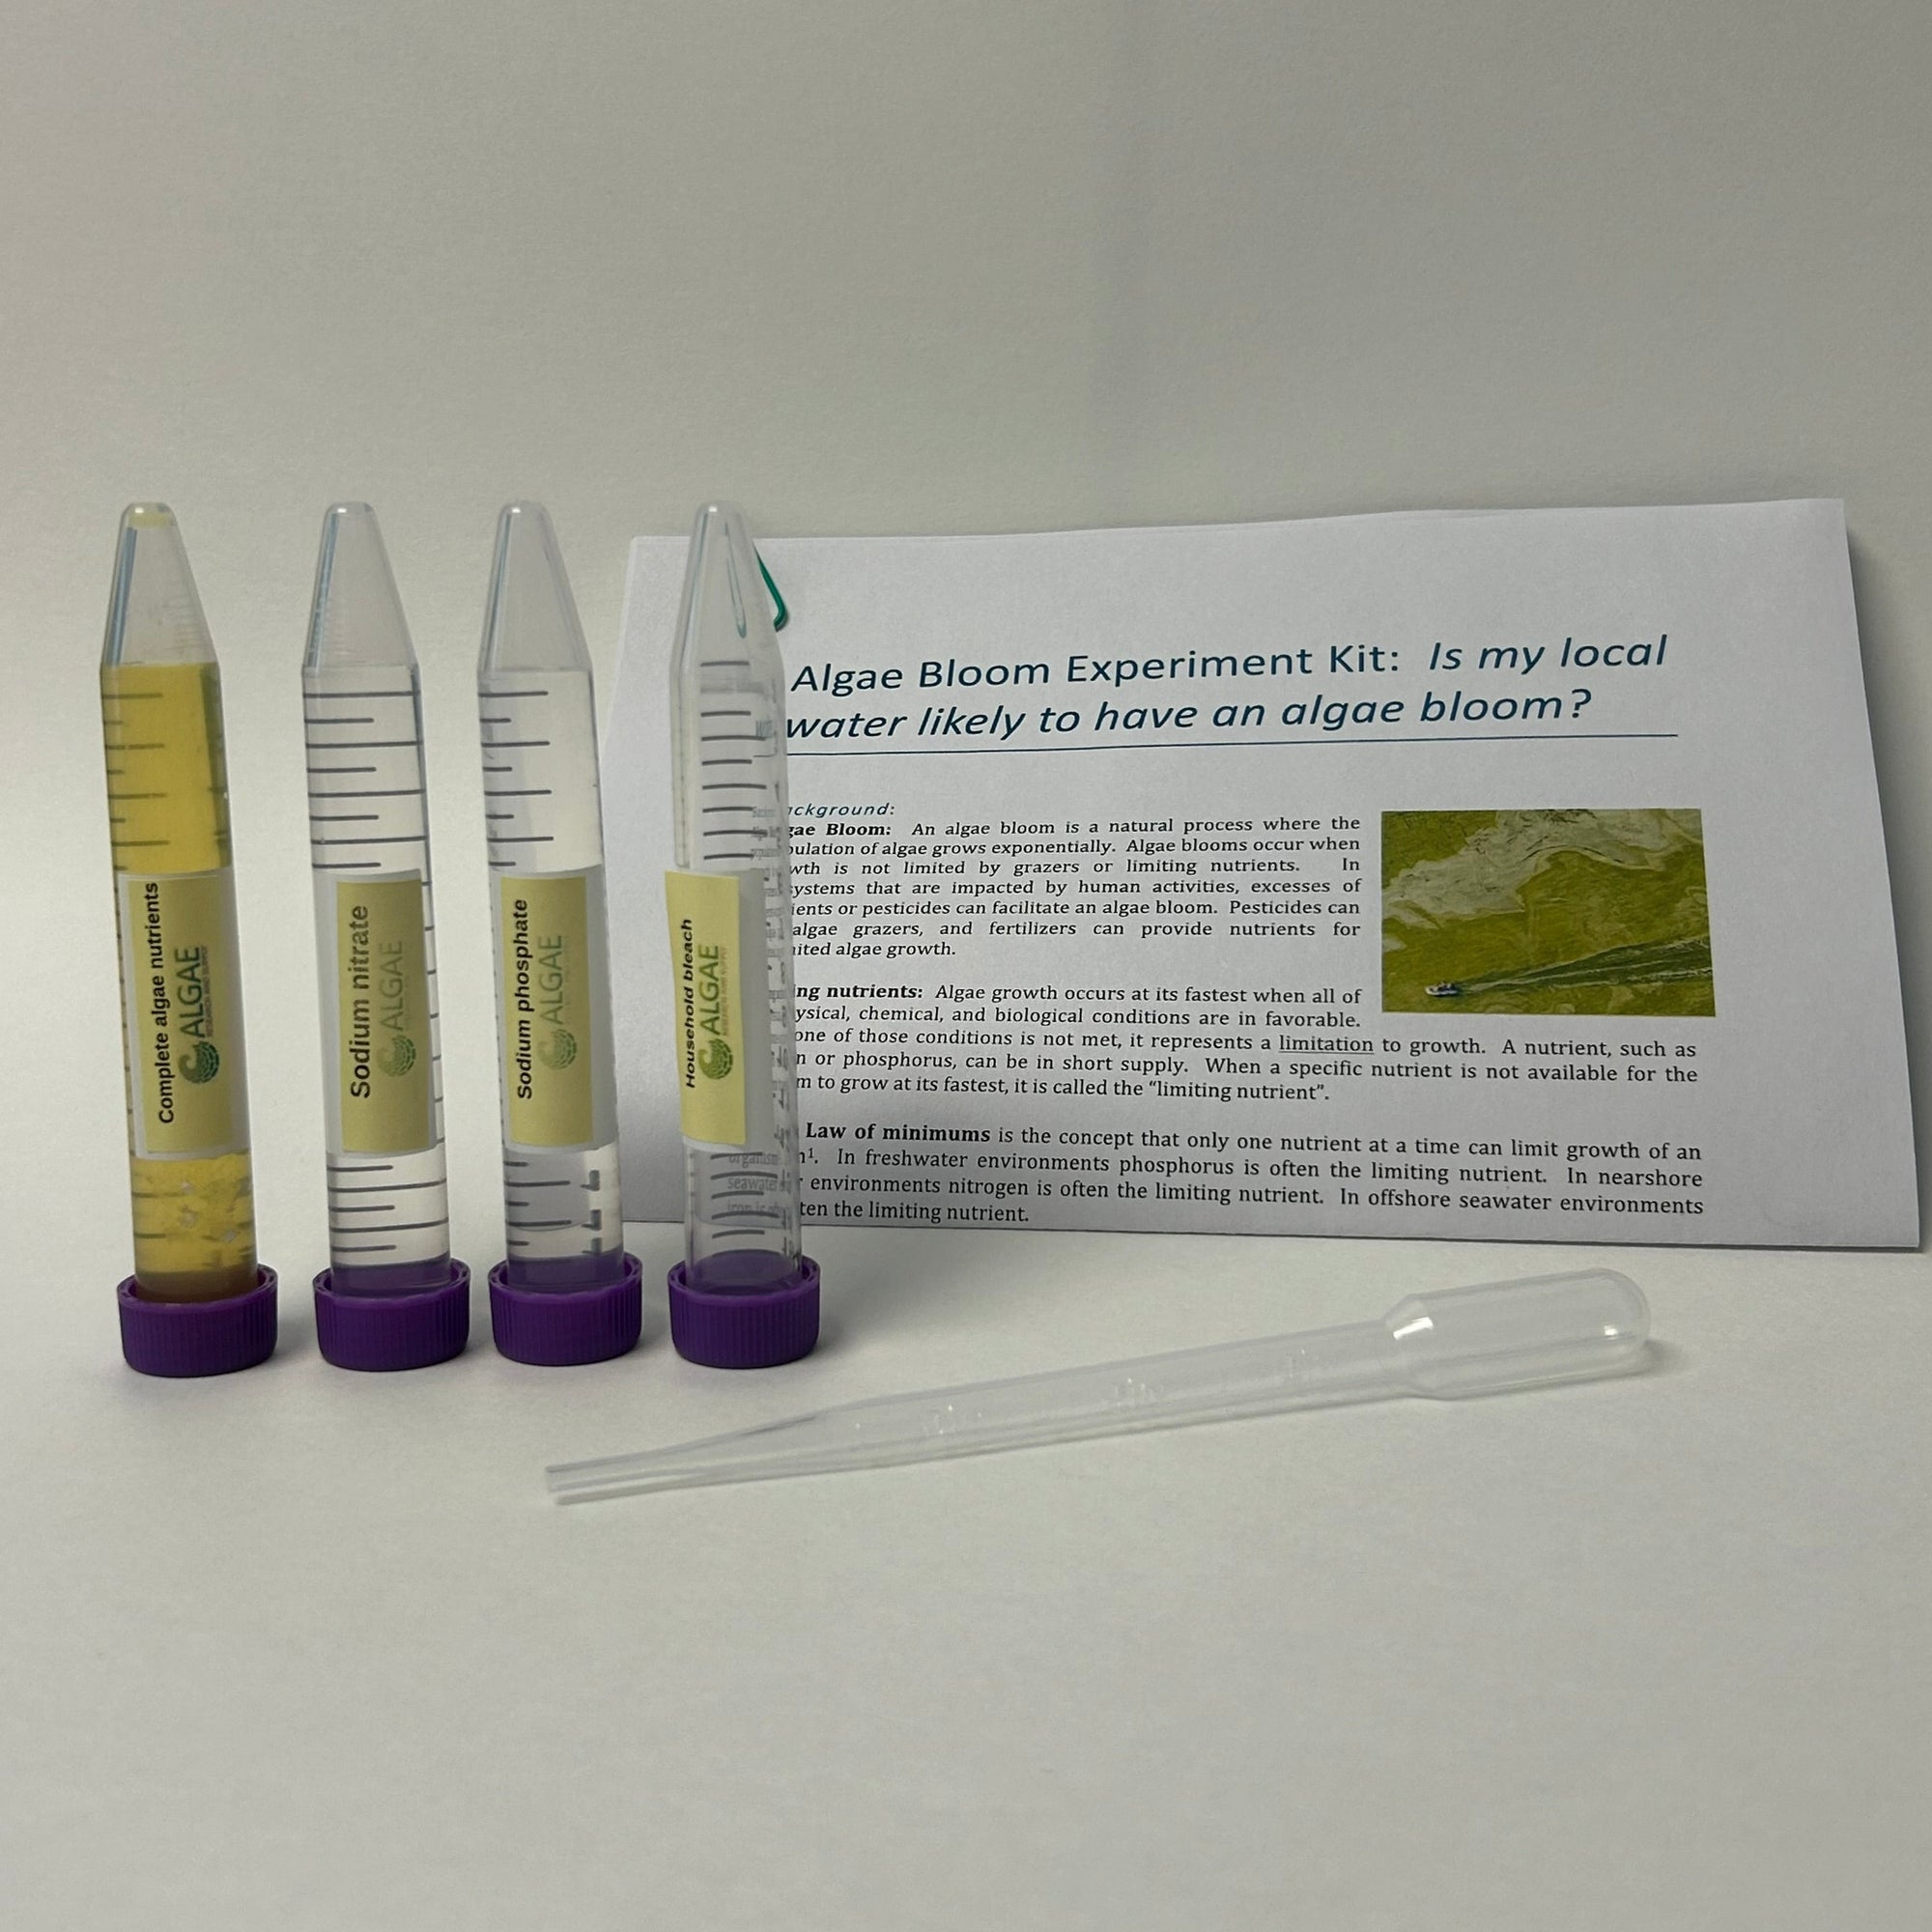 Algae Research Supply: Algae Bloom Experiment Kit: Is my local water likely to have an algae bloom?